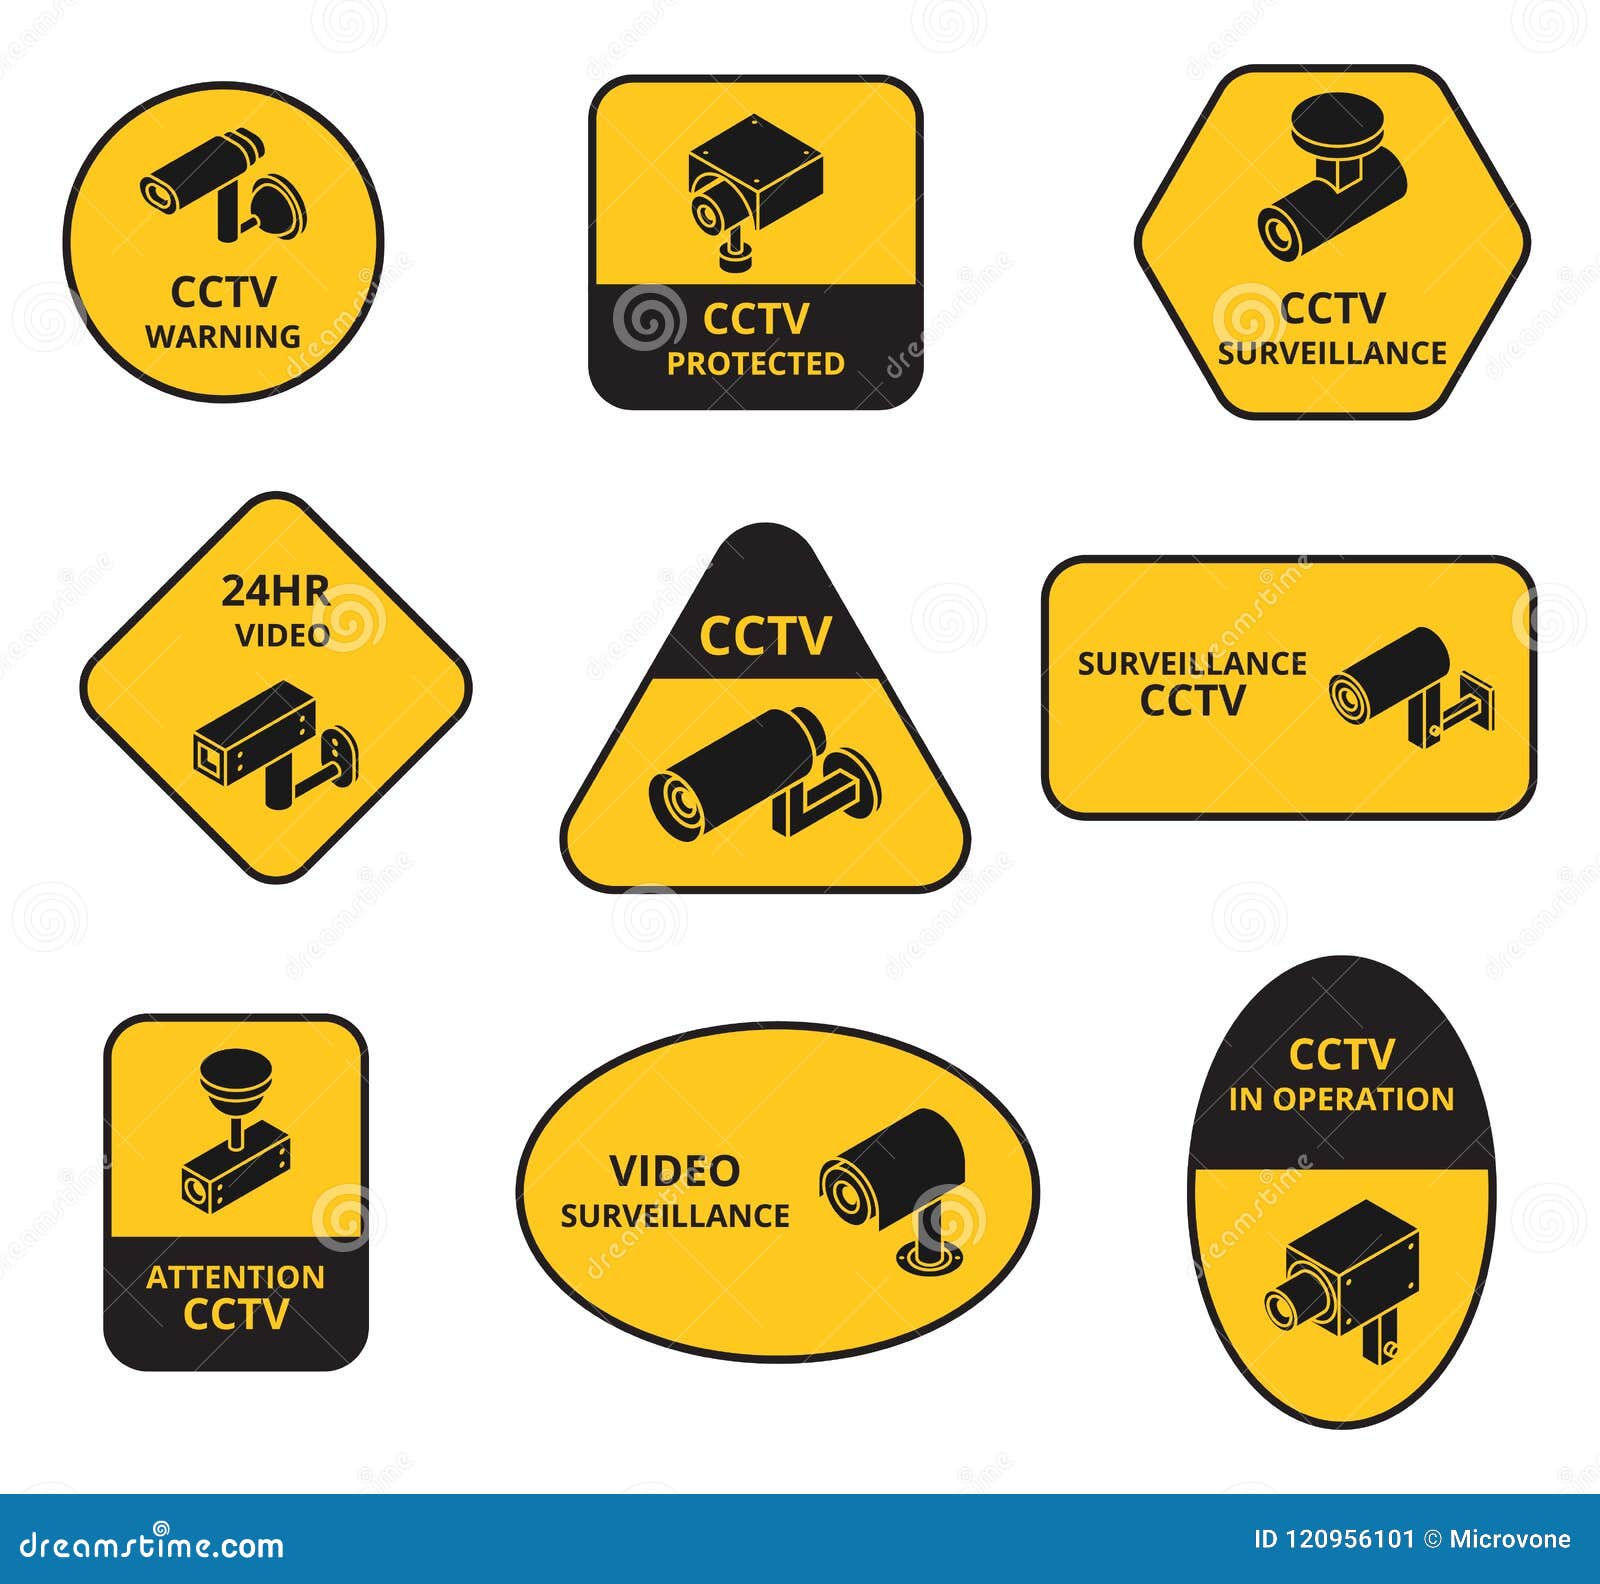 A4 Sticker - CCTV Closed Circuit Television Sign 200mm x 300mm MISC4 